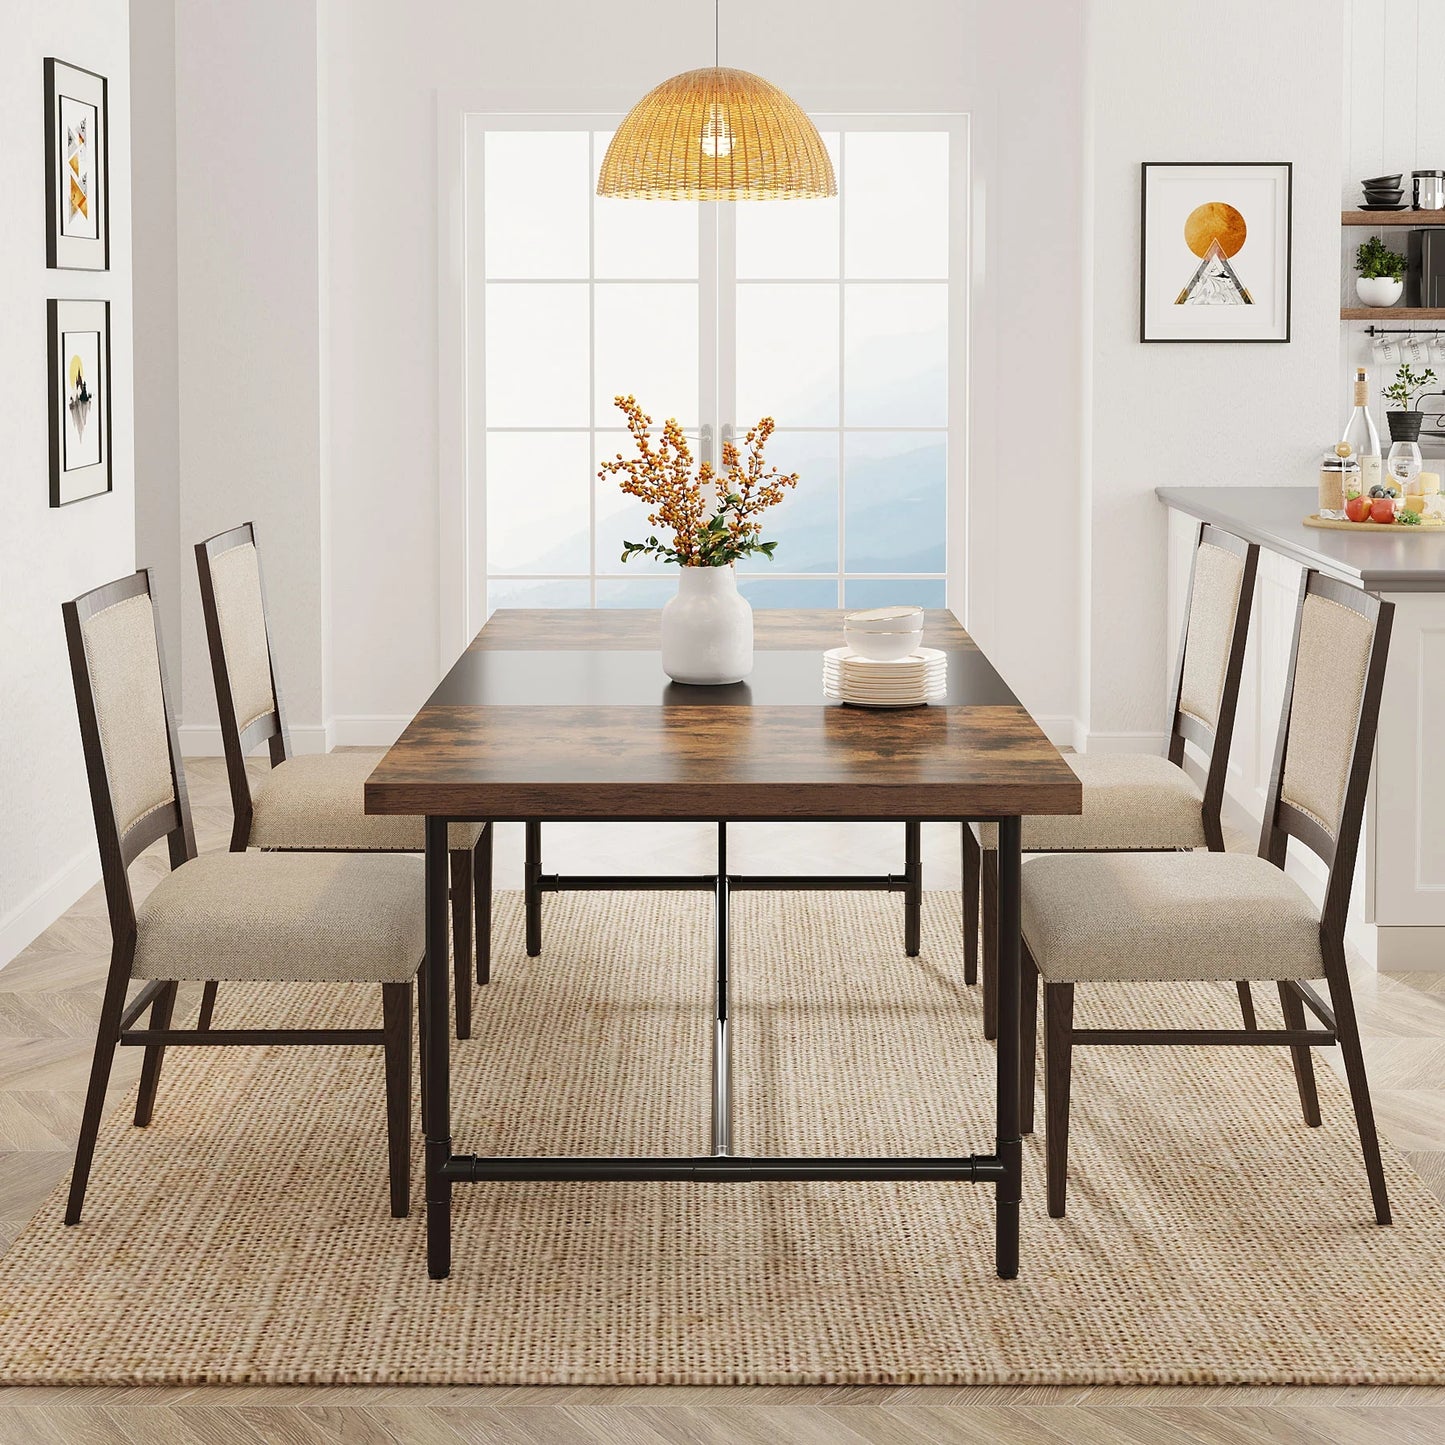 Tribesigns Dining Table, Industrial Breakfast Dinner Table for 6-8 people